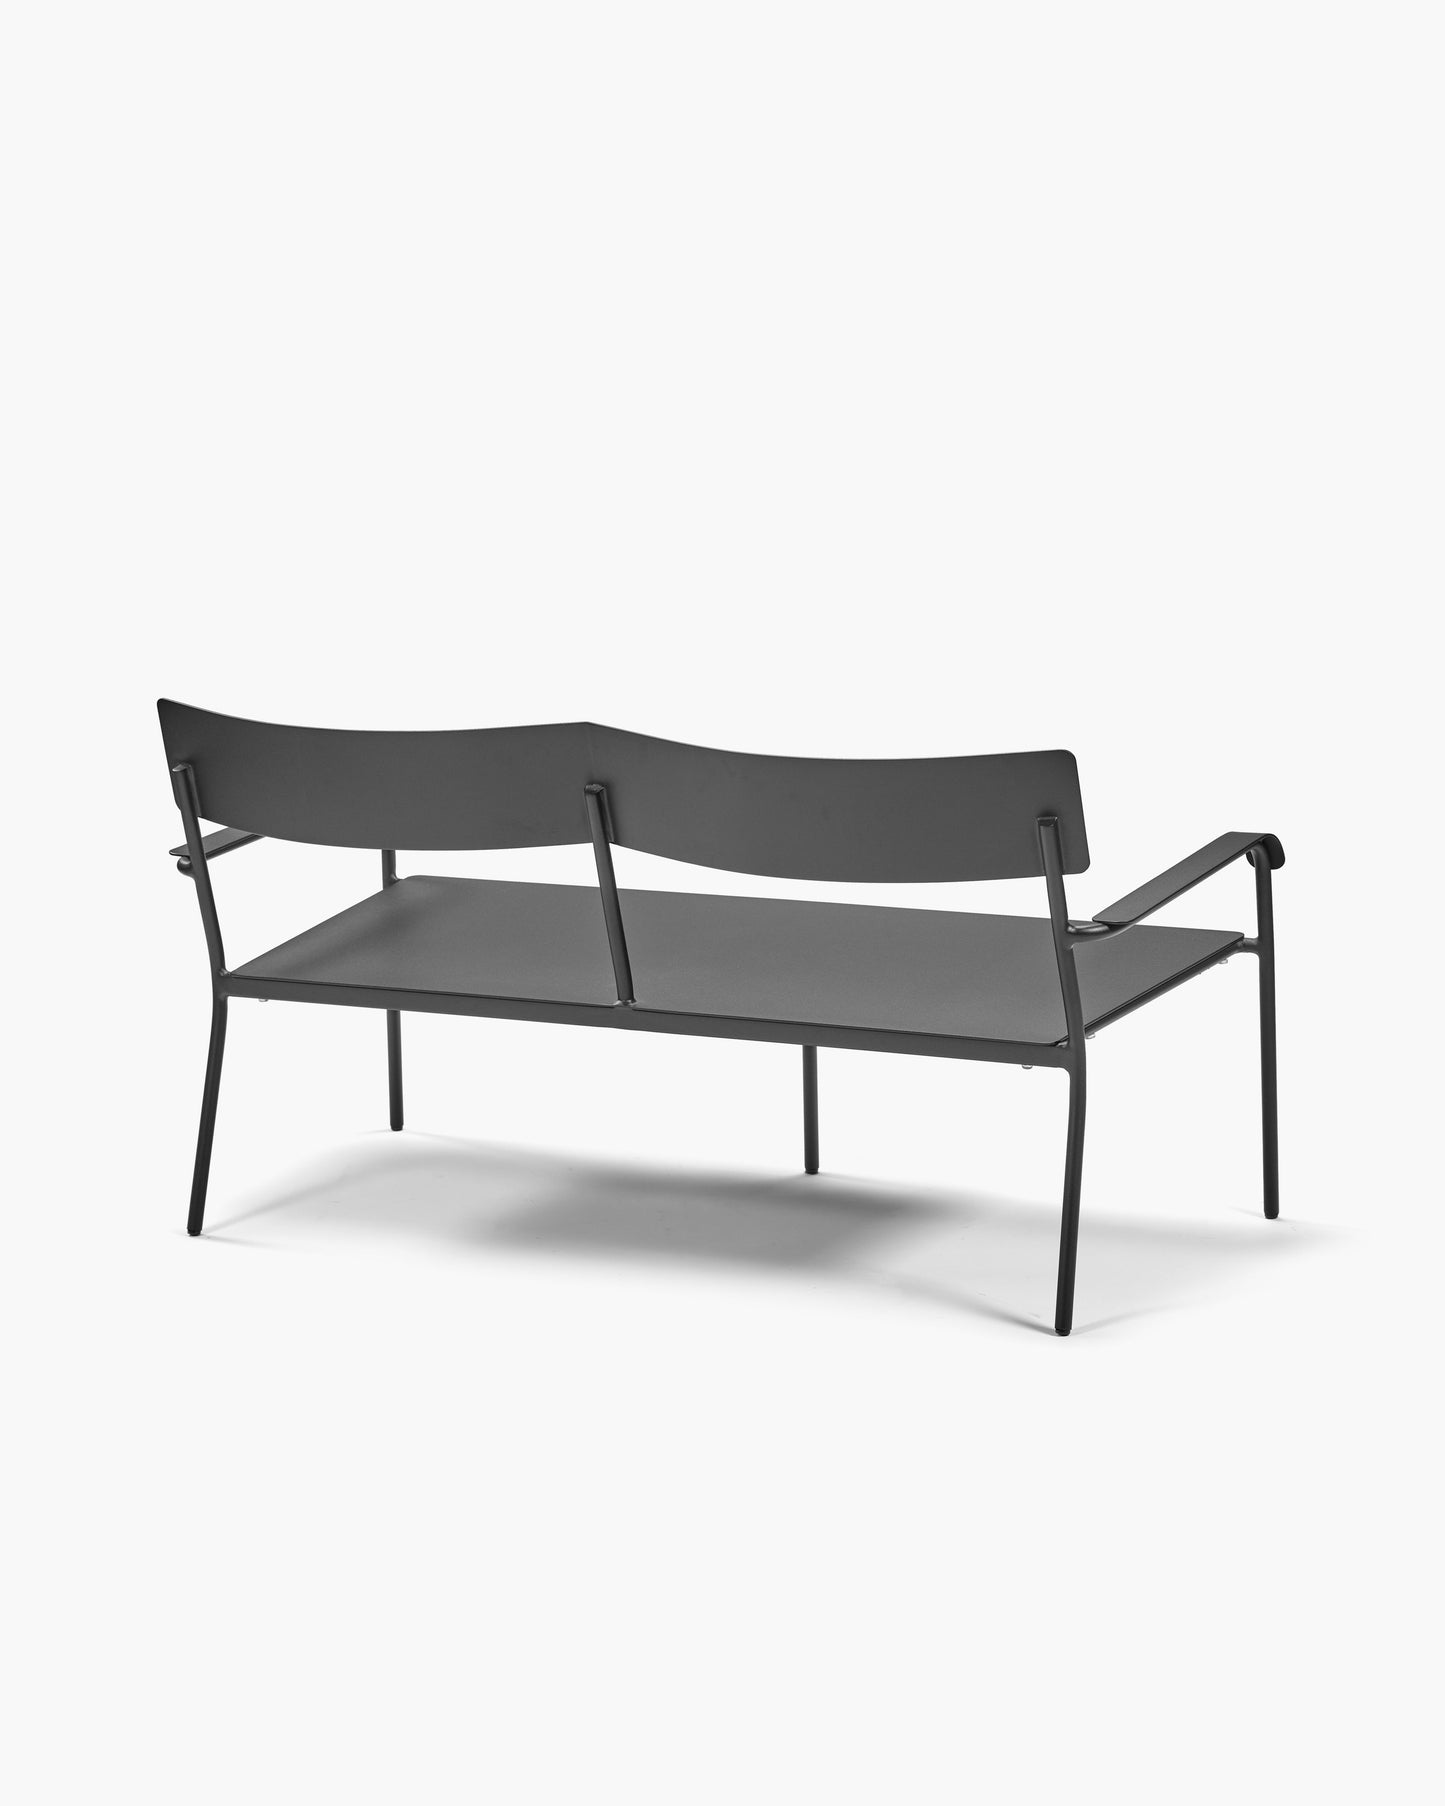 Two seater aluminum August